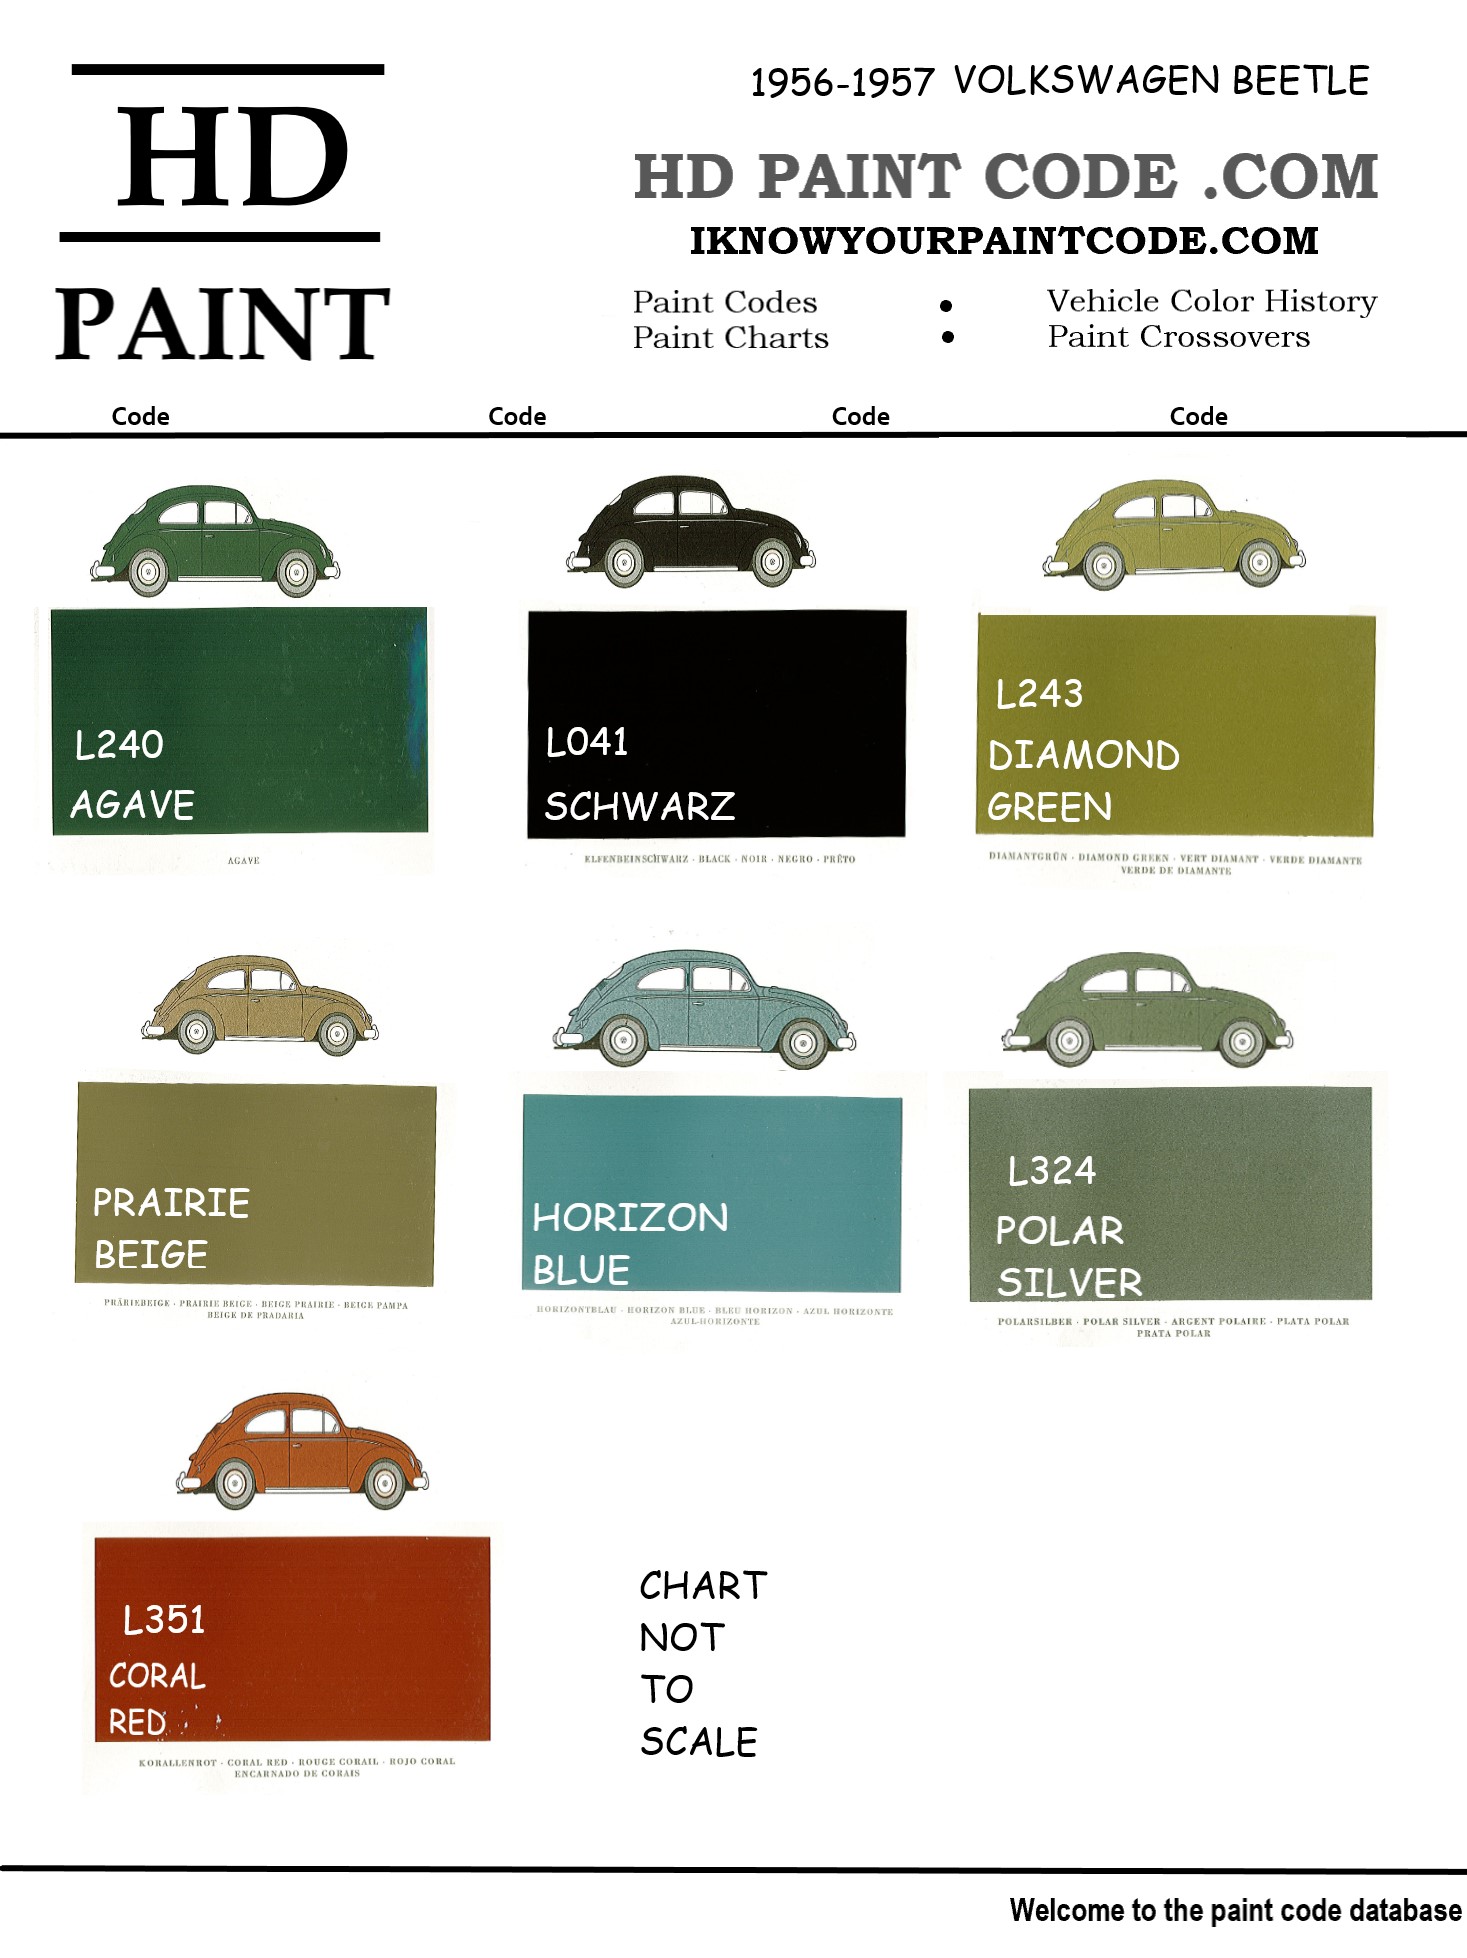 colors used on volkwagen beetle vehicles in 1956 and 1957